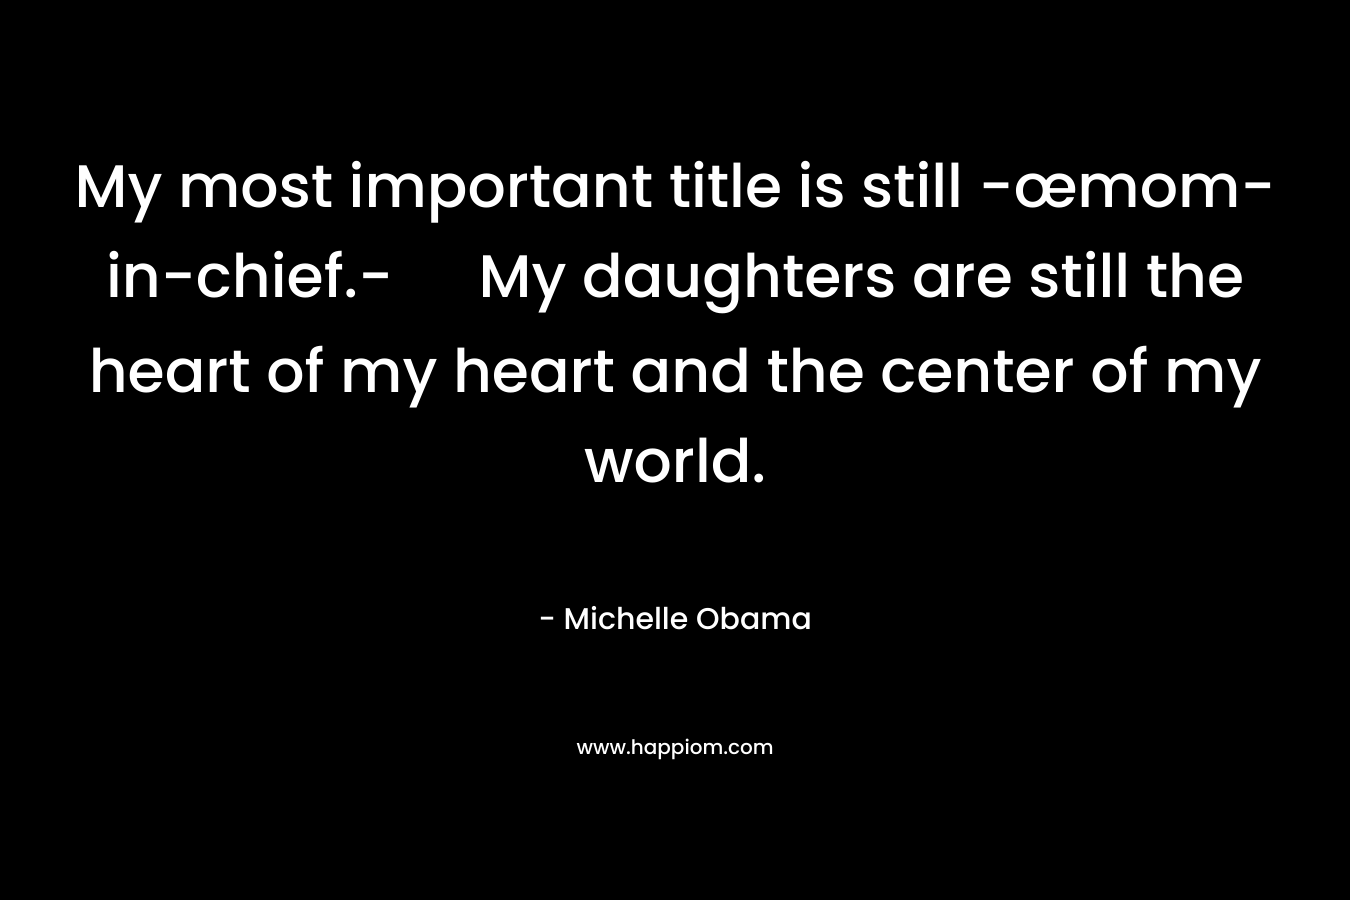 My most important title is still -œmom-in-chief.- My daughters are still the heart of my heart and the center of my world. – Michelle Obama